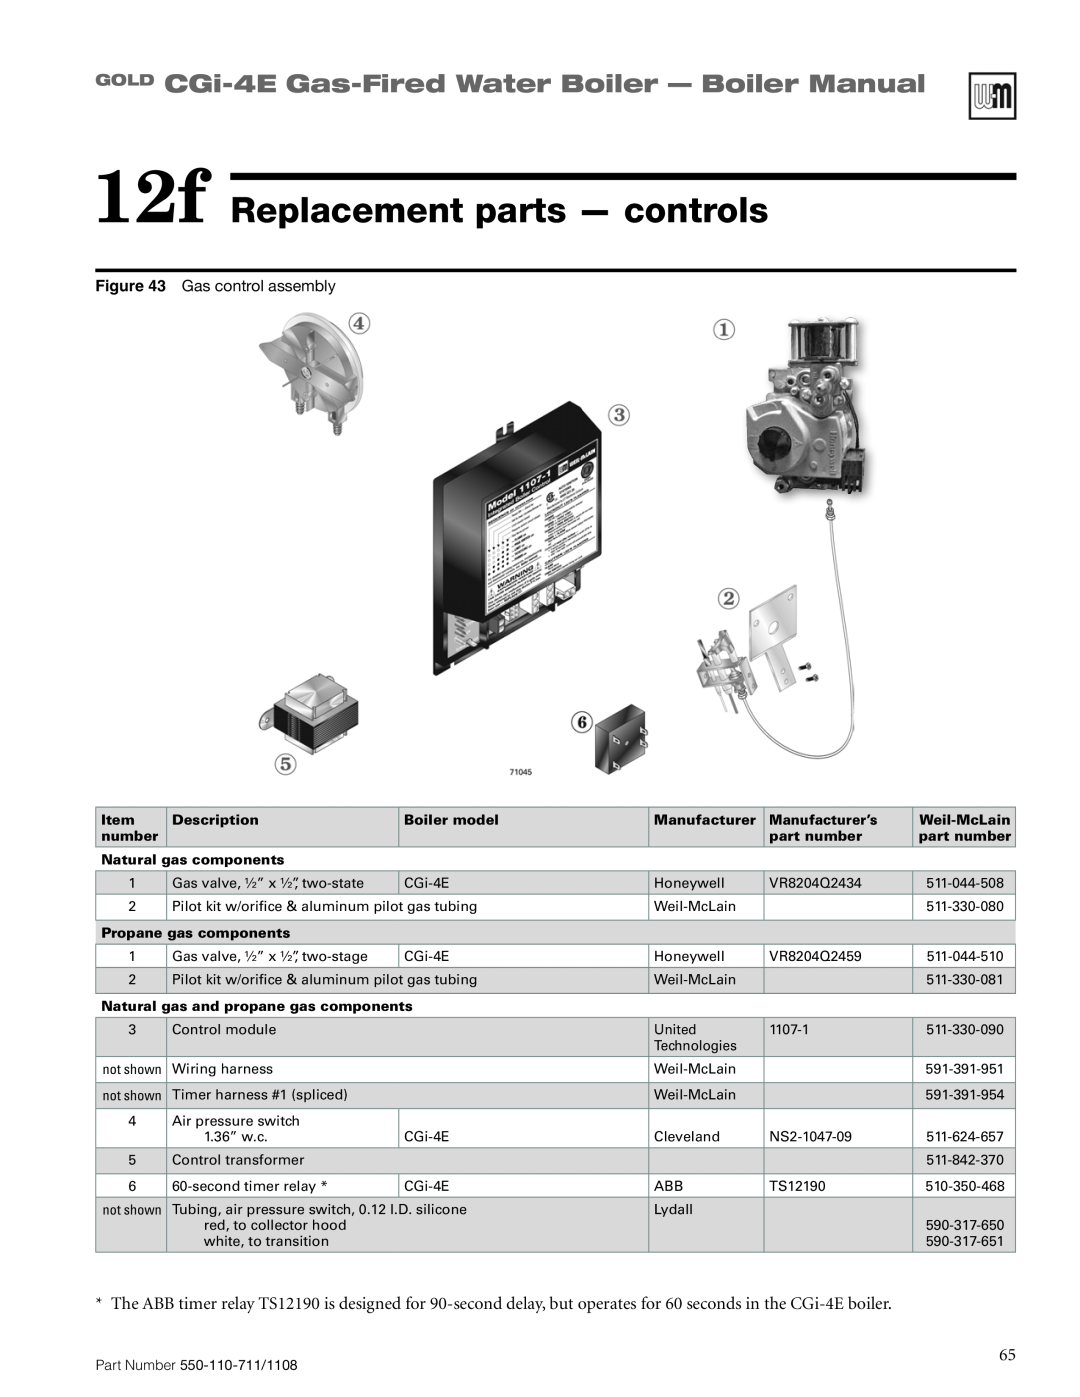 Weil-McLain CGI-4E manual 12f Replacement parts - controls, GOLD CGi-4E Gas-FiredWater Boiler - Boiler Manual, Item number 